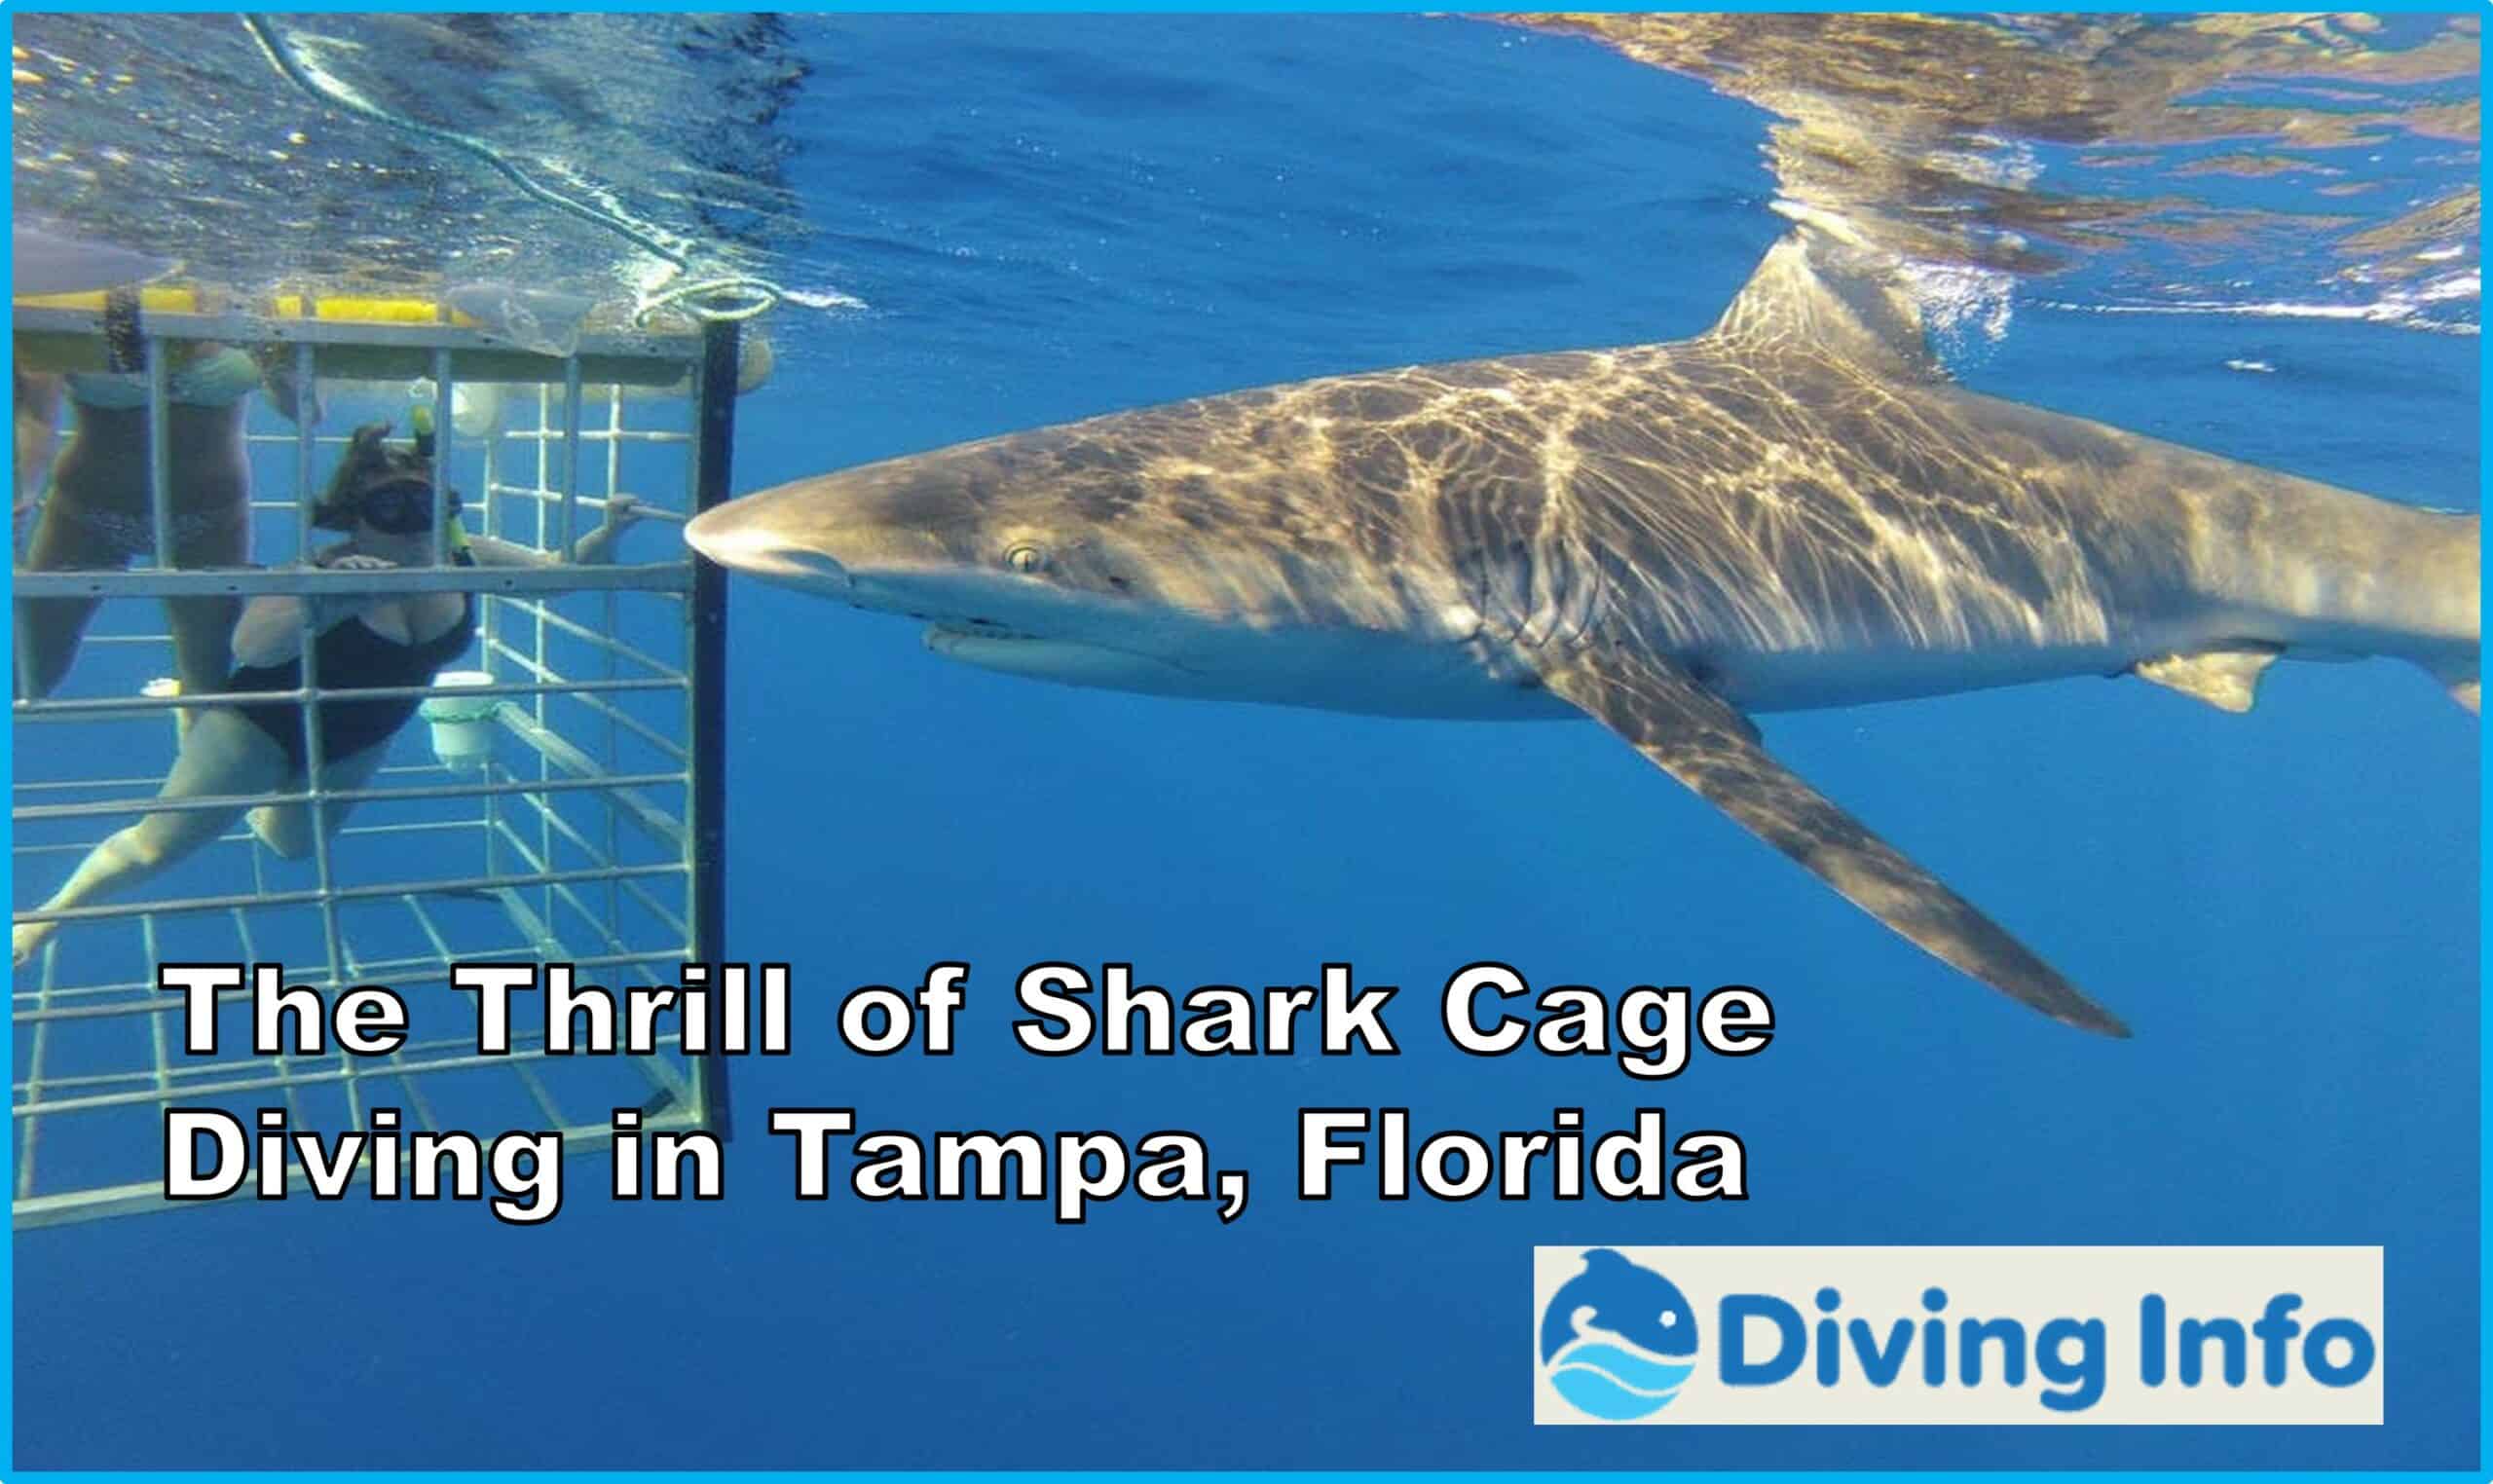 Shark Cage Diving in Tampa, Florida